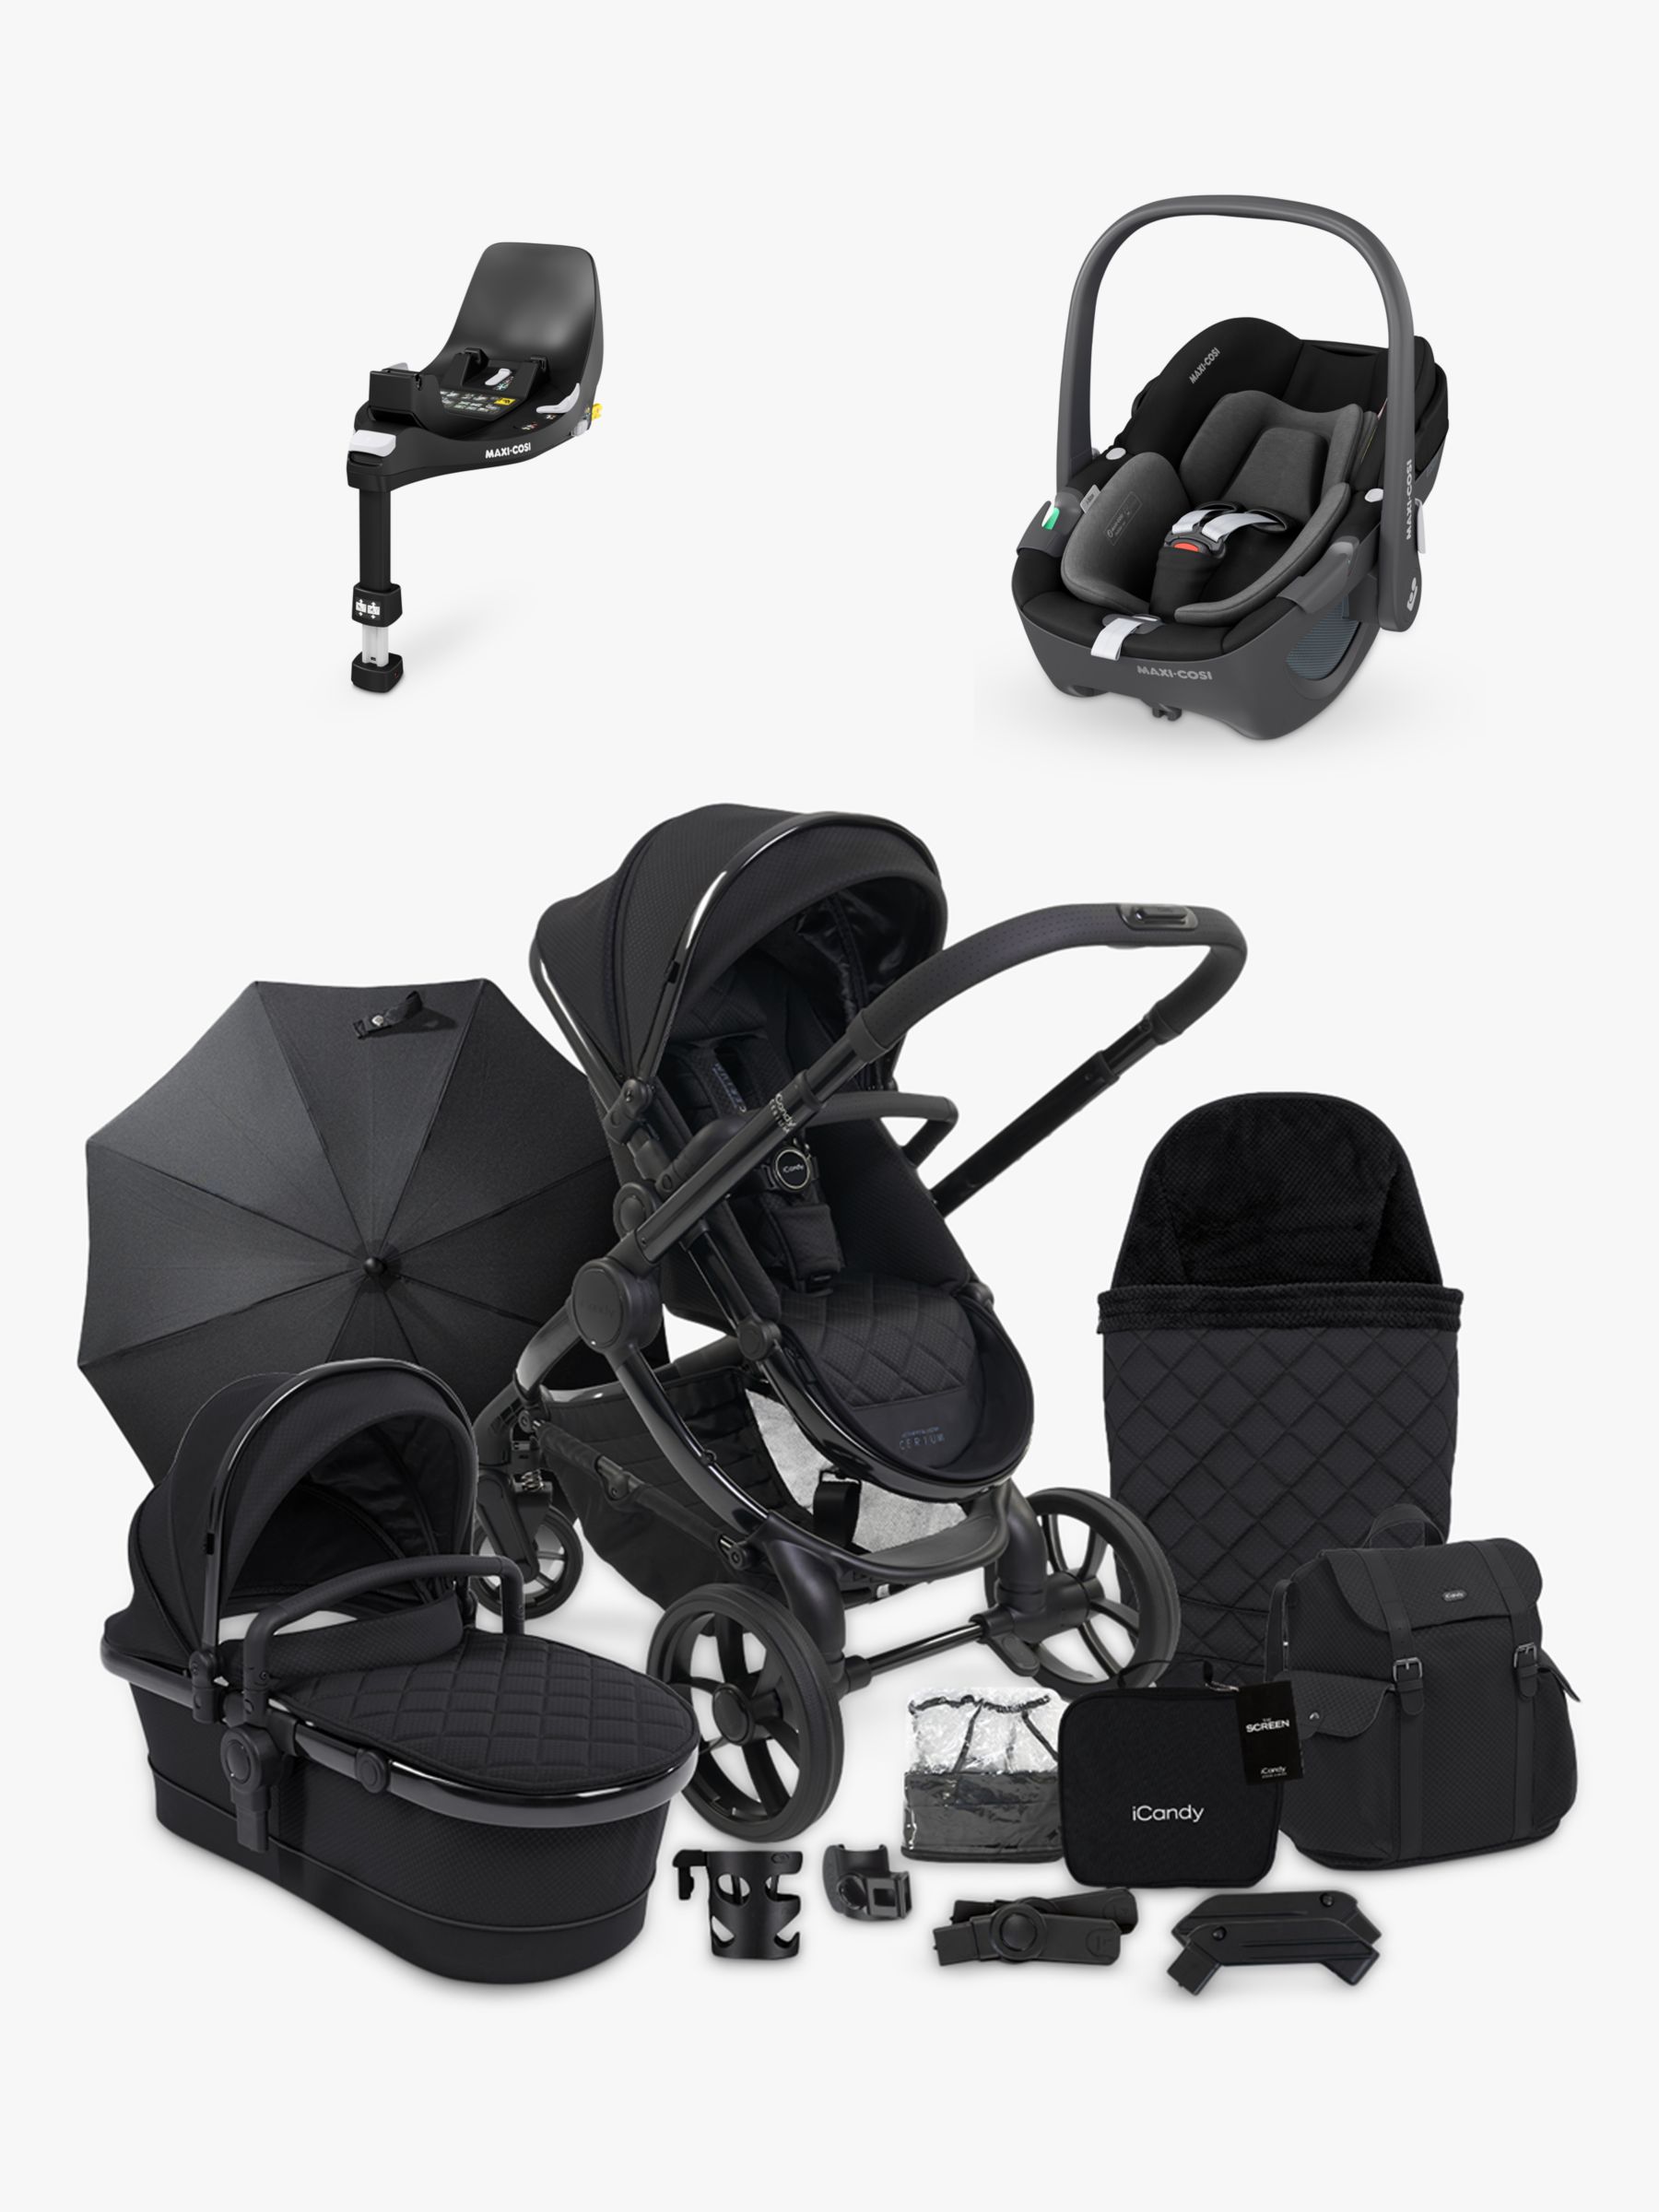 iCandy Peach 7 Designer Collection Pushchair & Accessories with Maxi-Cosi Pebble 360 Baby Car Seat and Base Bundle, Cerium/Essential Black